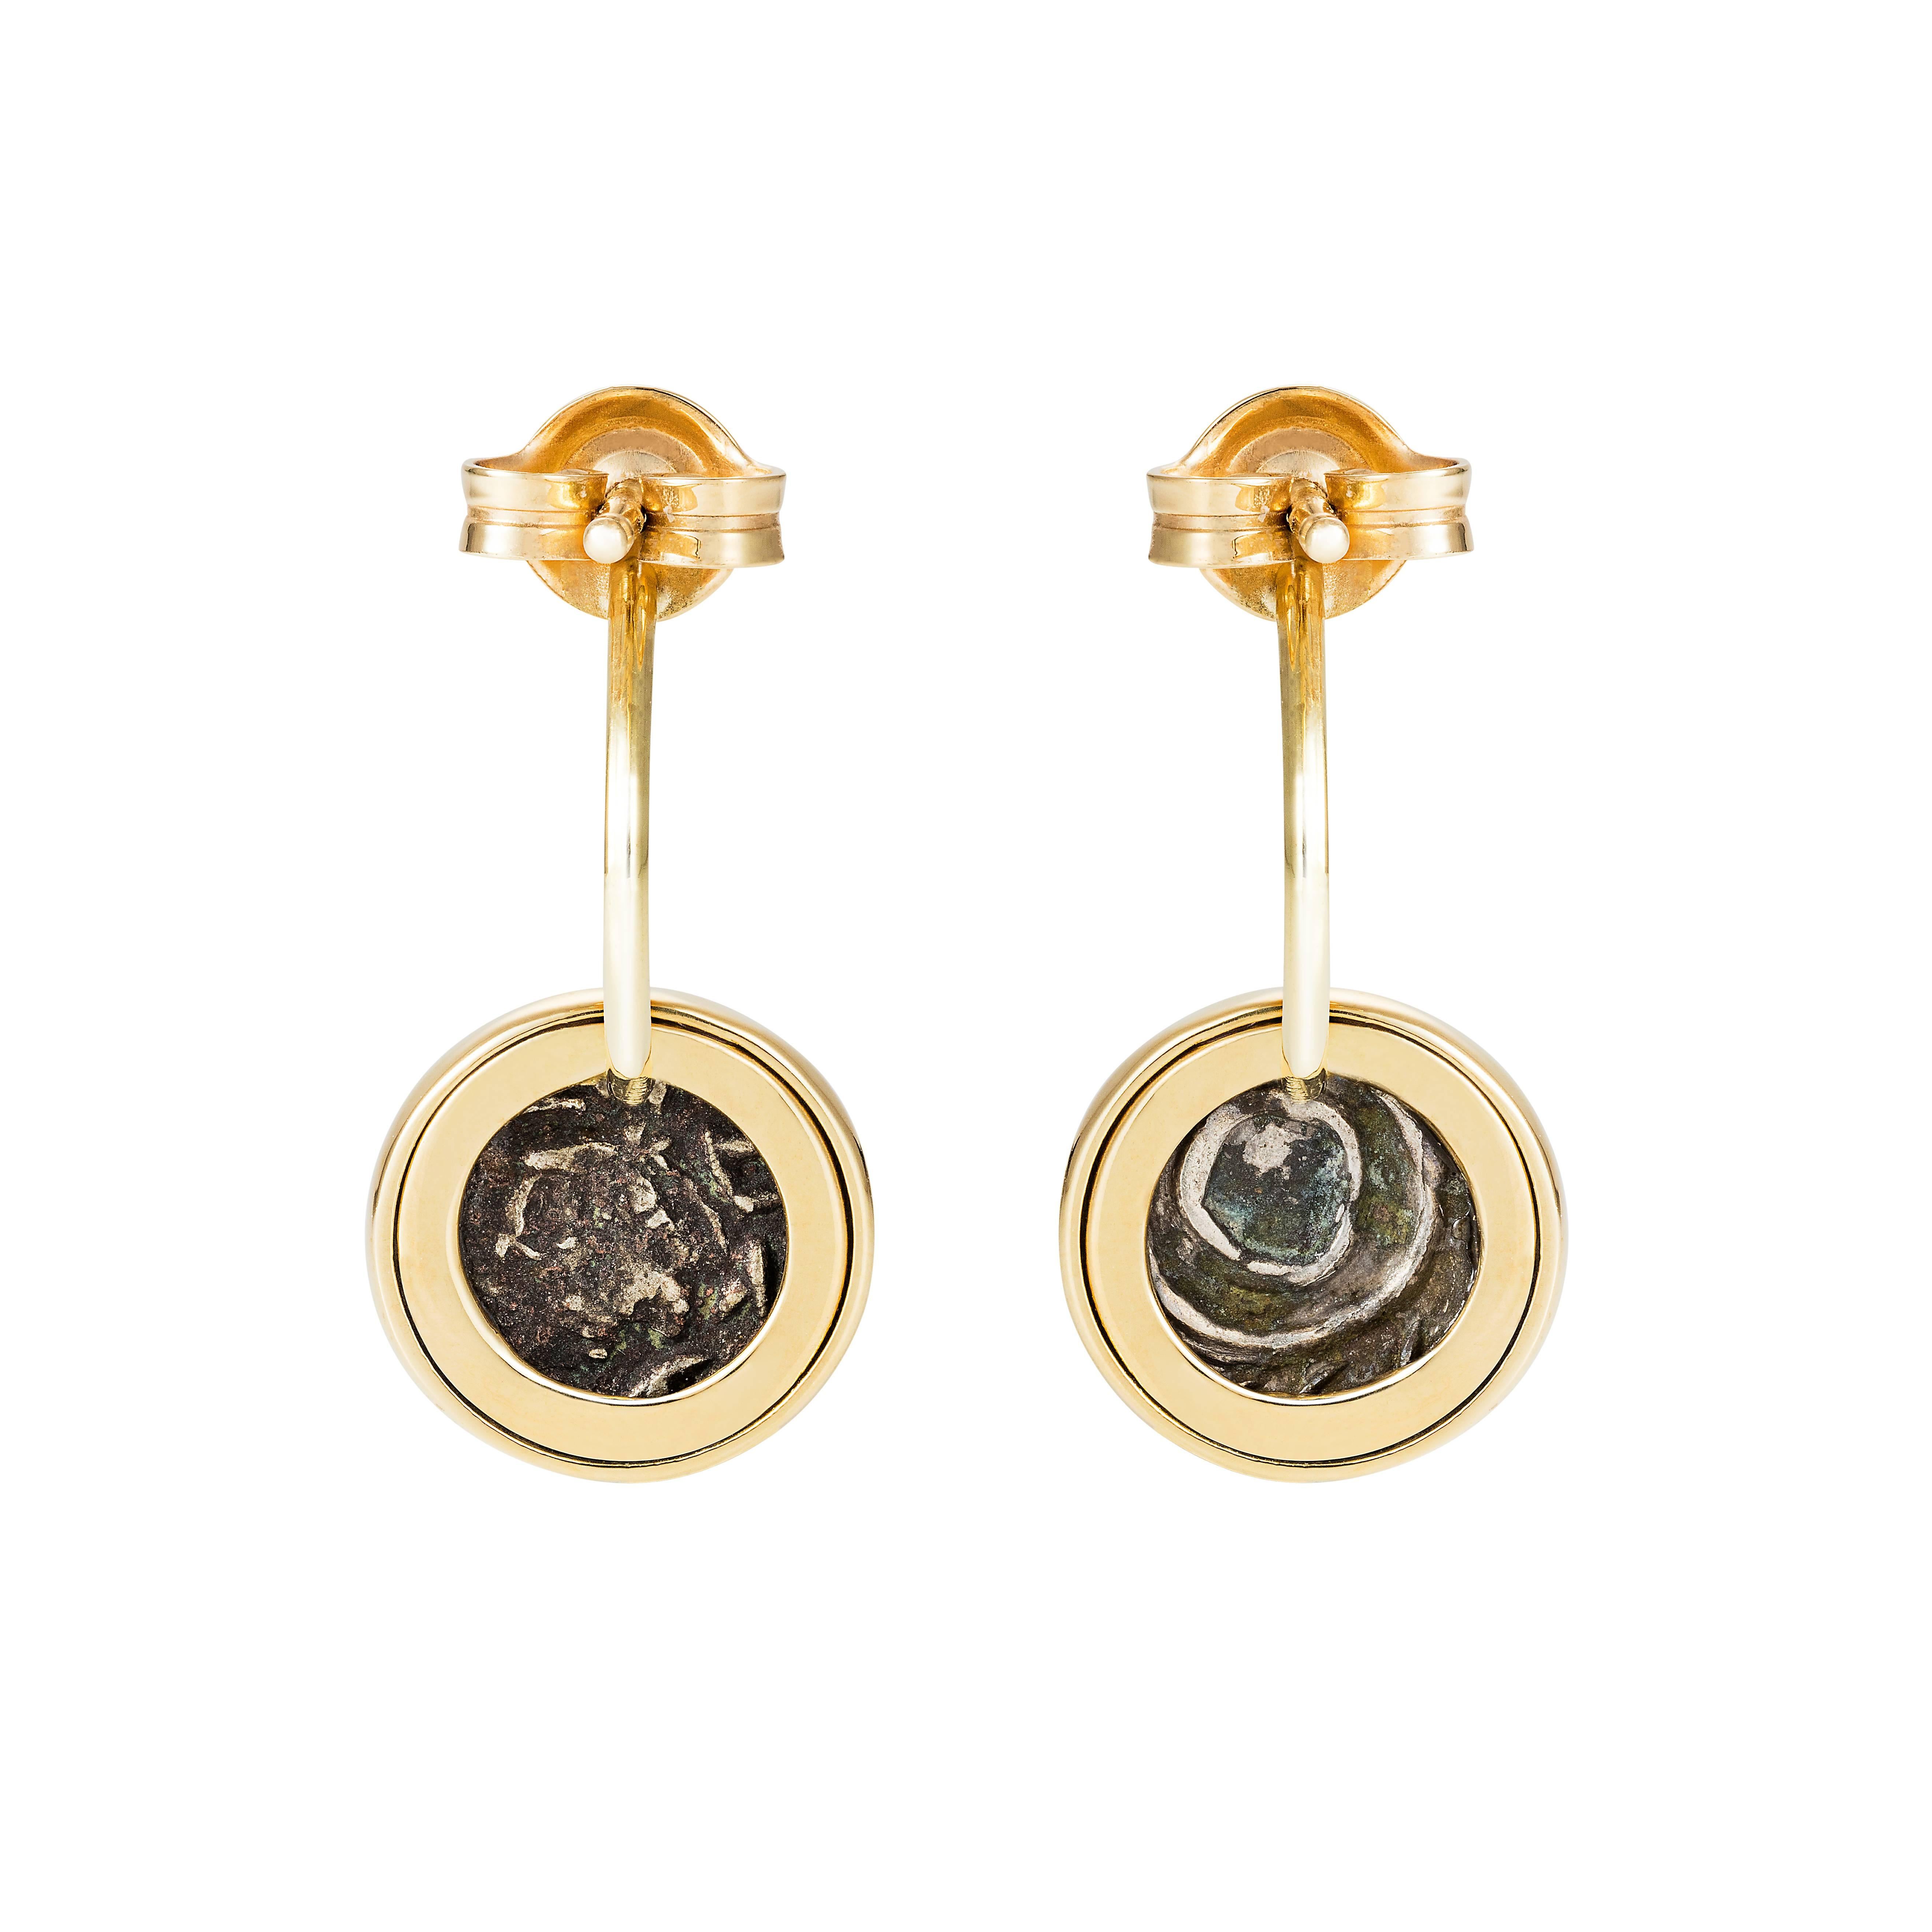 These DUBINI coin earrings from the 'Empires' collection feature authentic Persepolis coins minted circa 1st Century B.C. set in 18K yellow gold.

* Due to the unique process of hand carving coins in ancient times, there may be a few stylistic